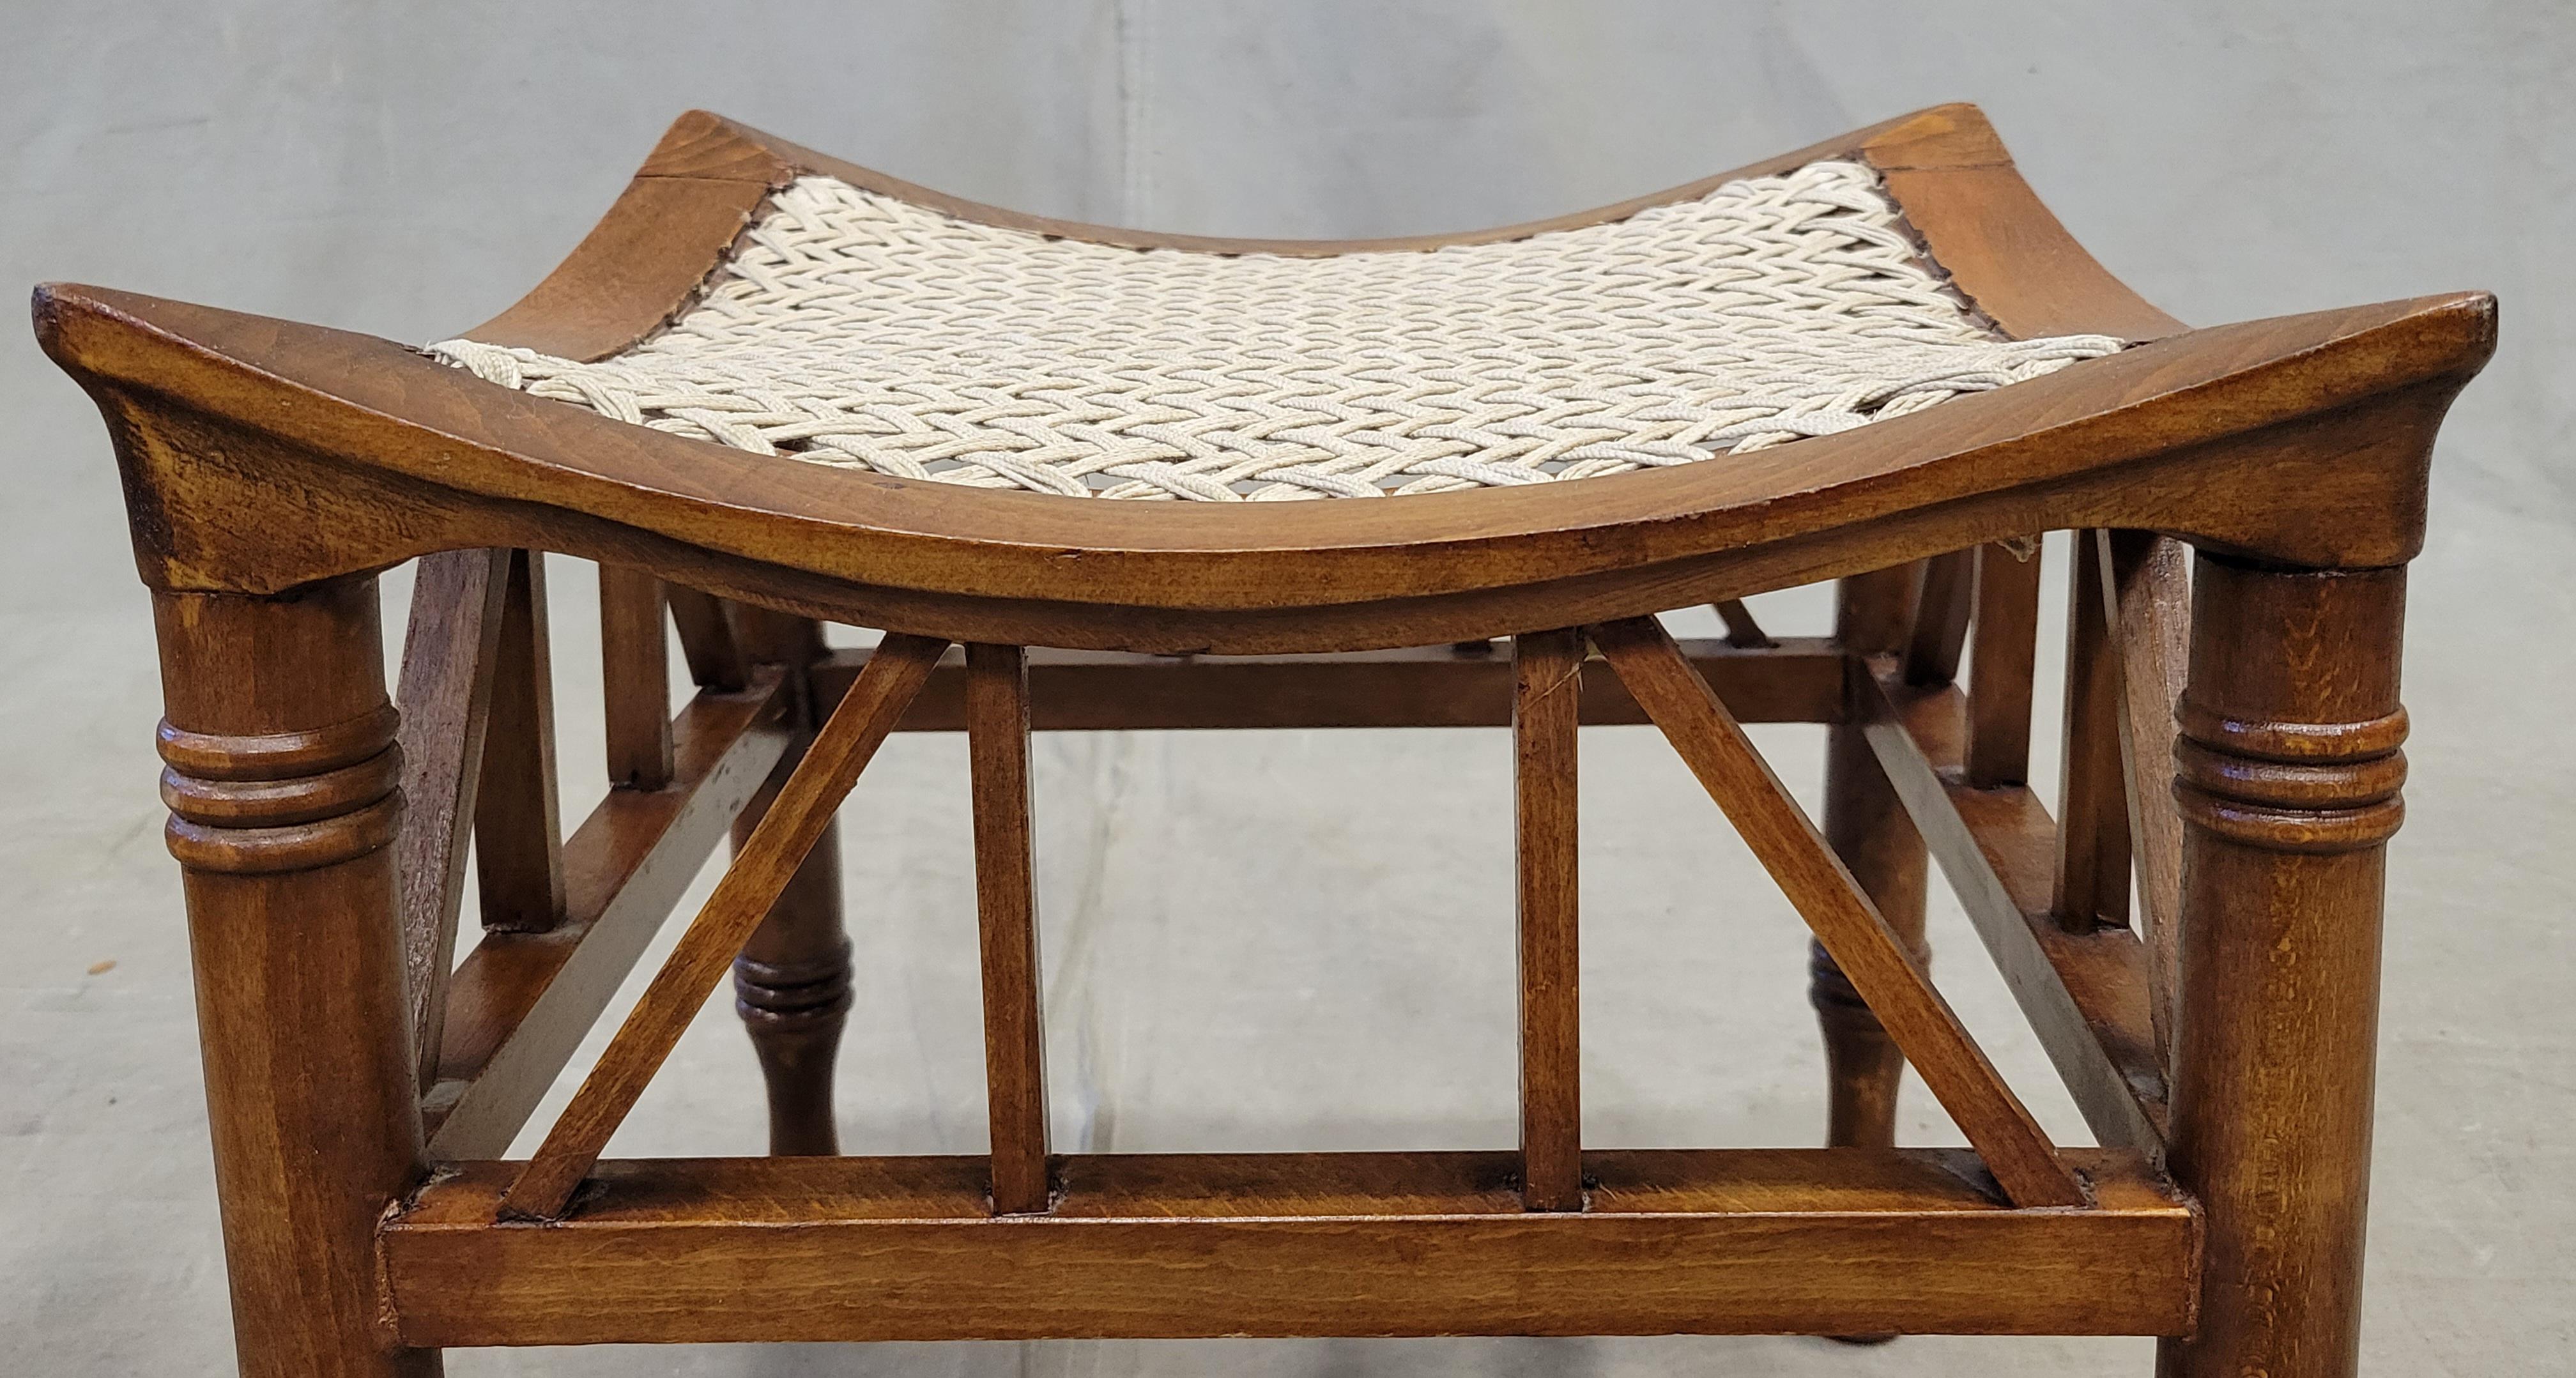 Early 20th Century Antique Egyptian Revival Thebes Stools with Woven Cord Seats by Liberty & Co